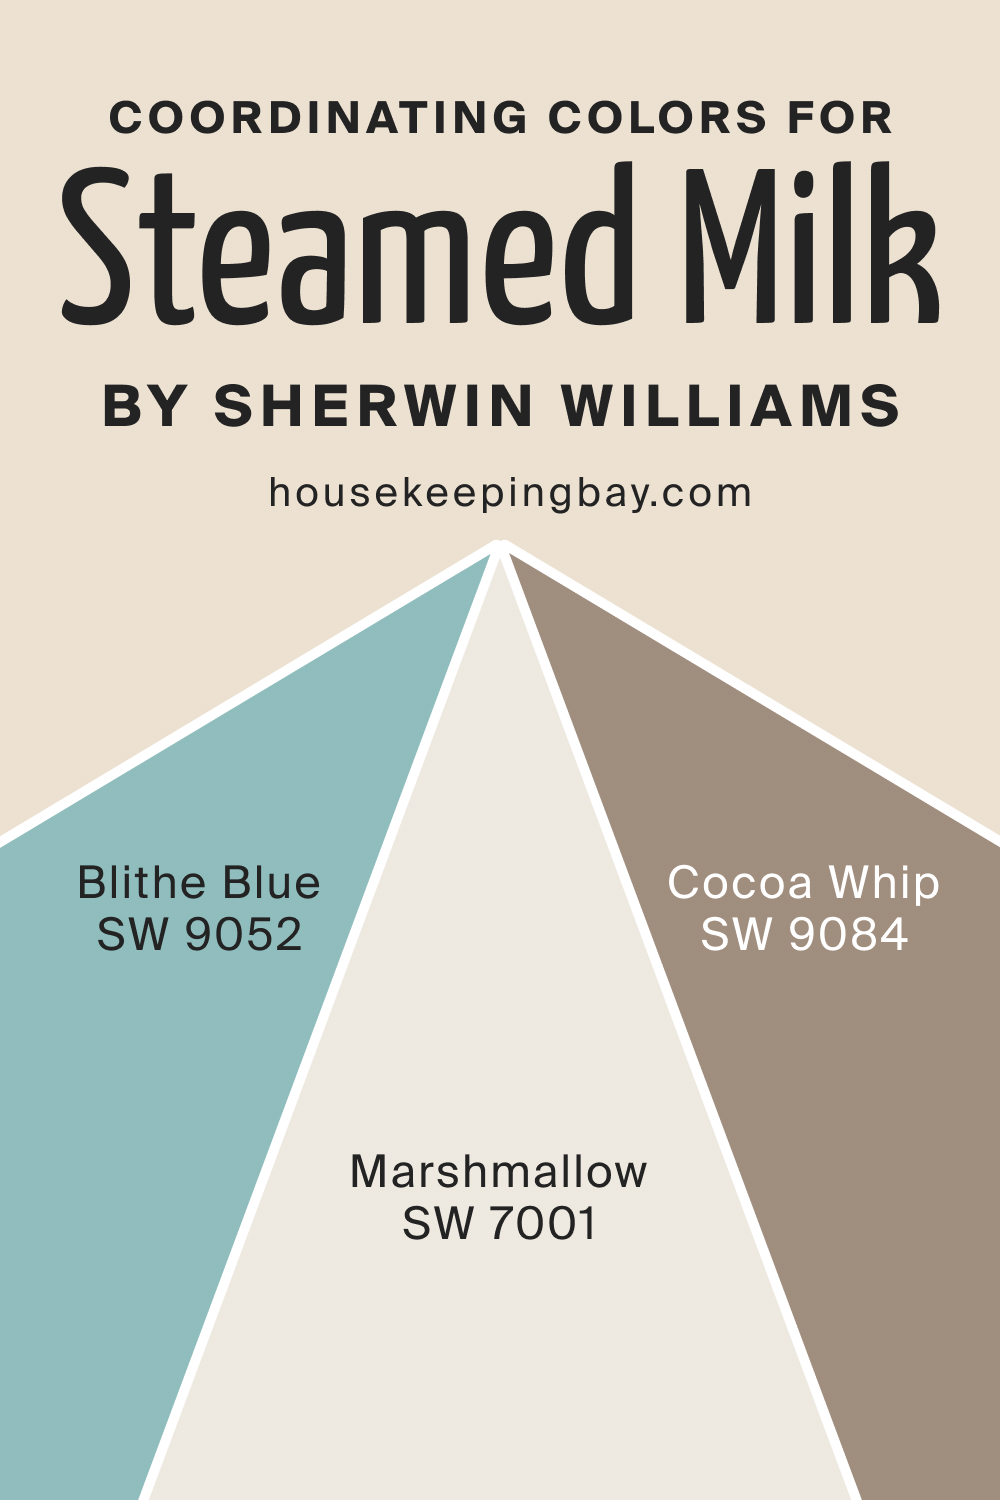 Coordinating Colors for SW Steamed Milk by Sherwin Williams